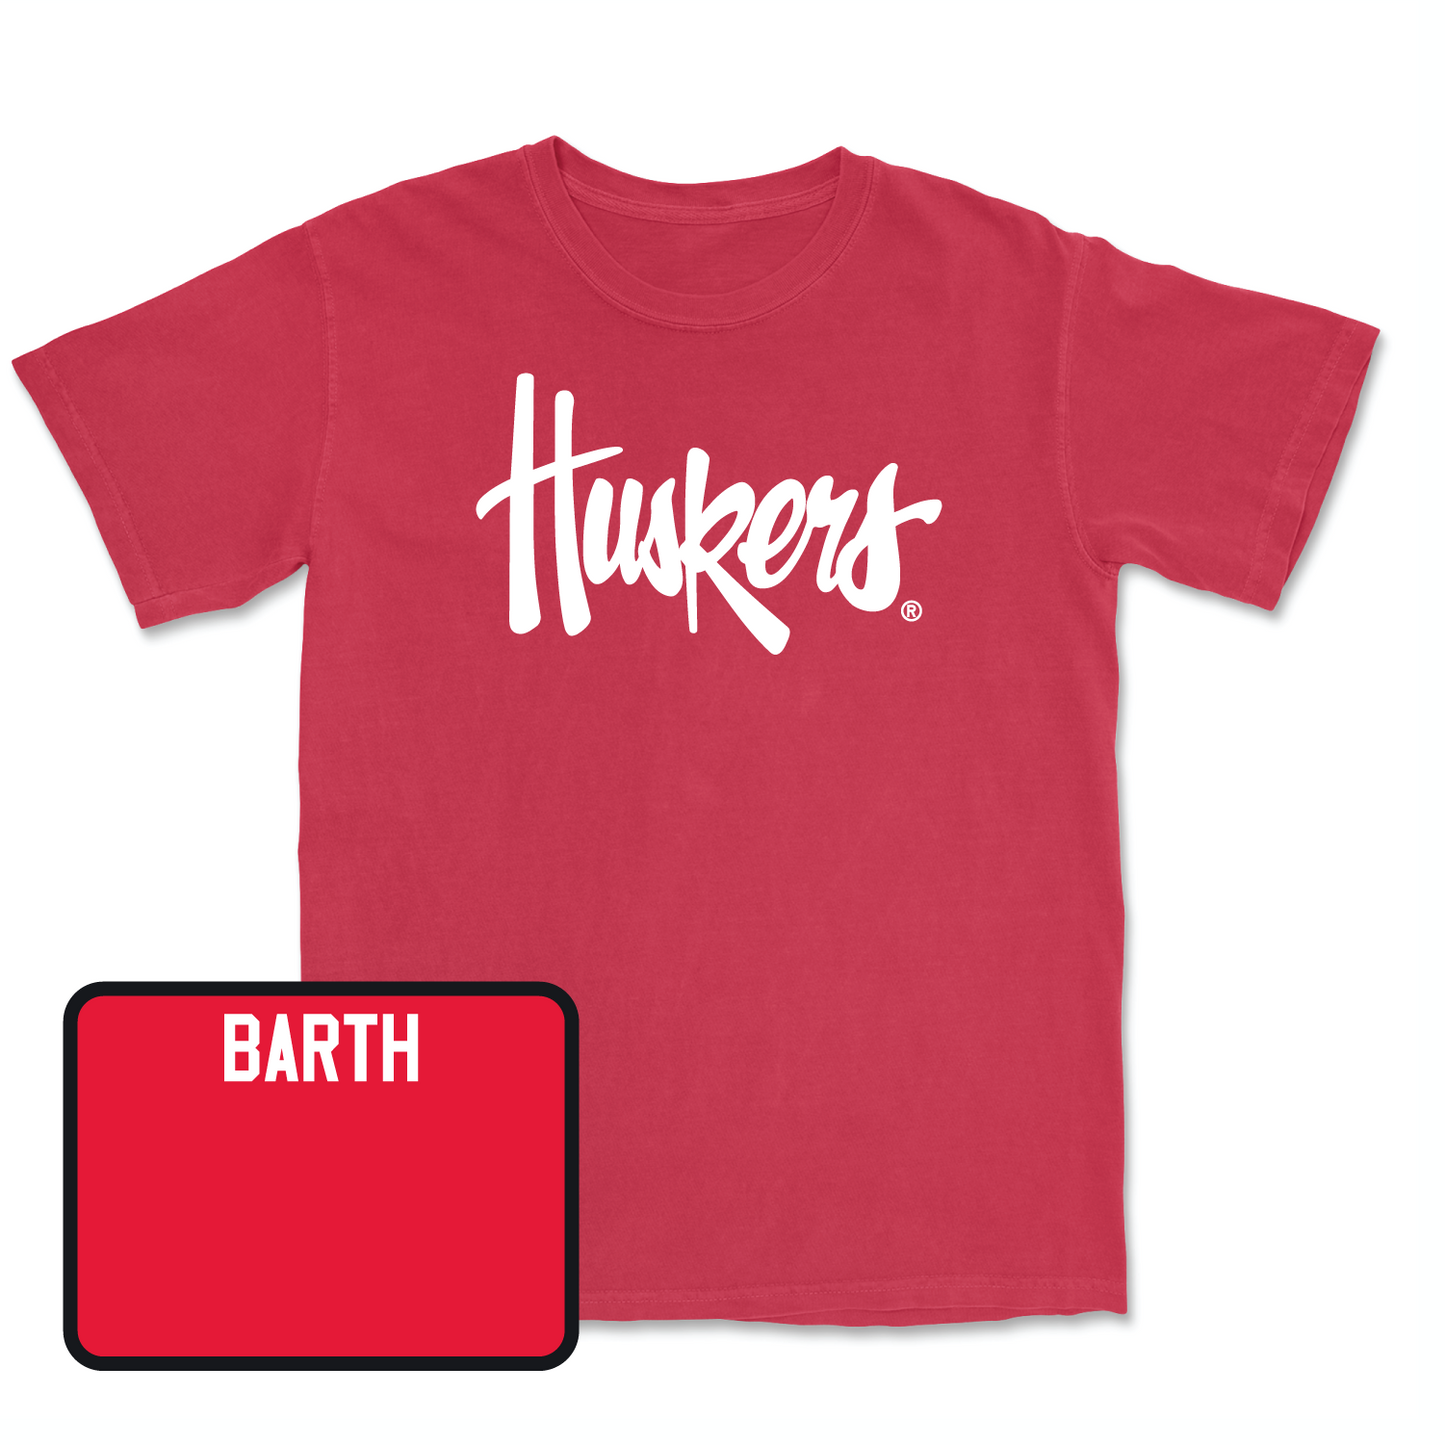 Red Women's Gymnastics Huskers Tee X-Large / Katelyn Barth